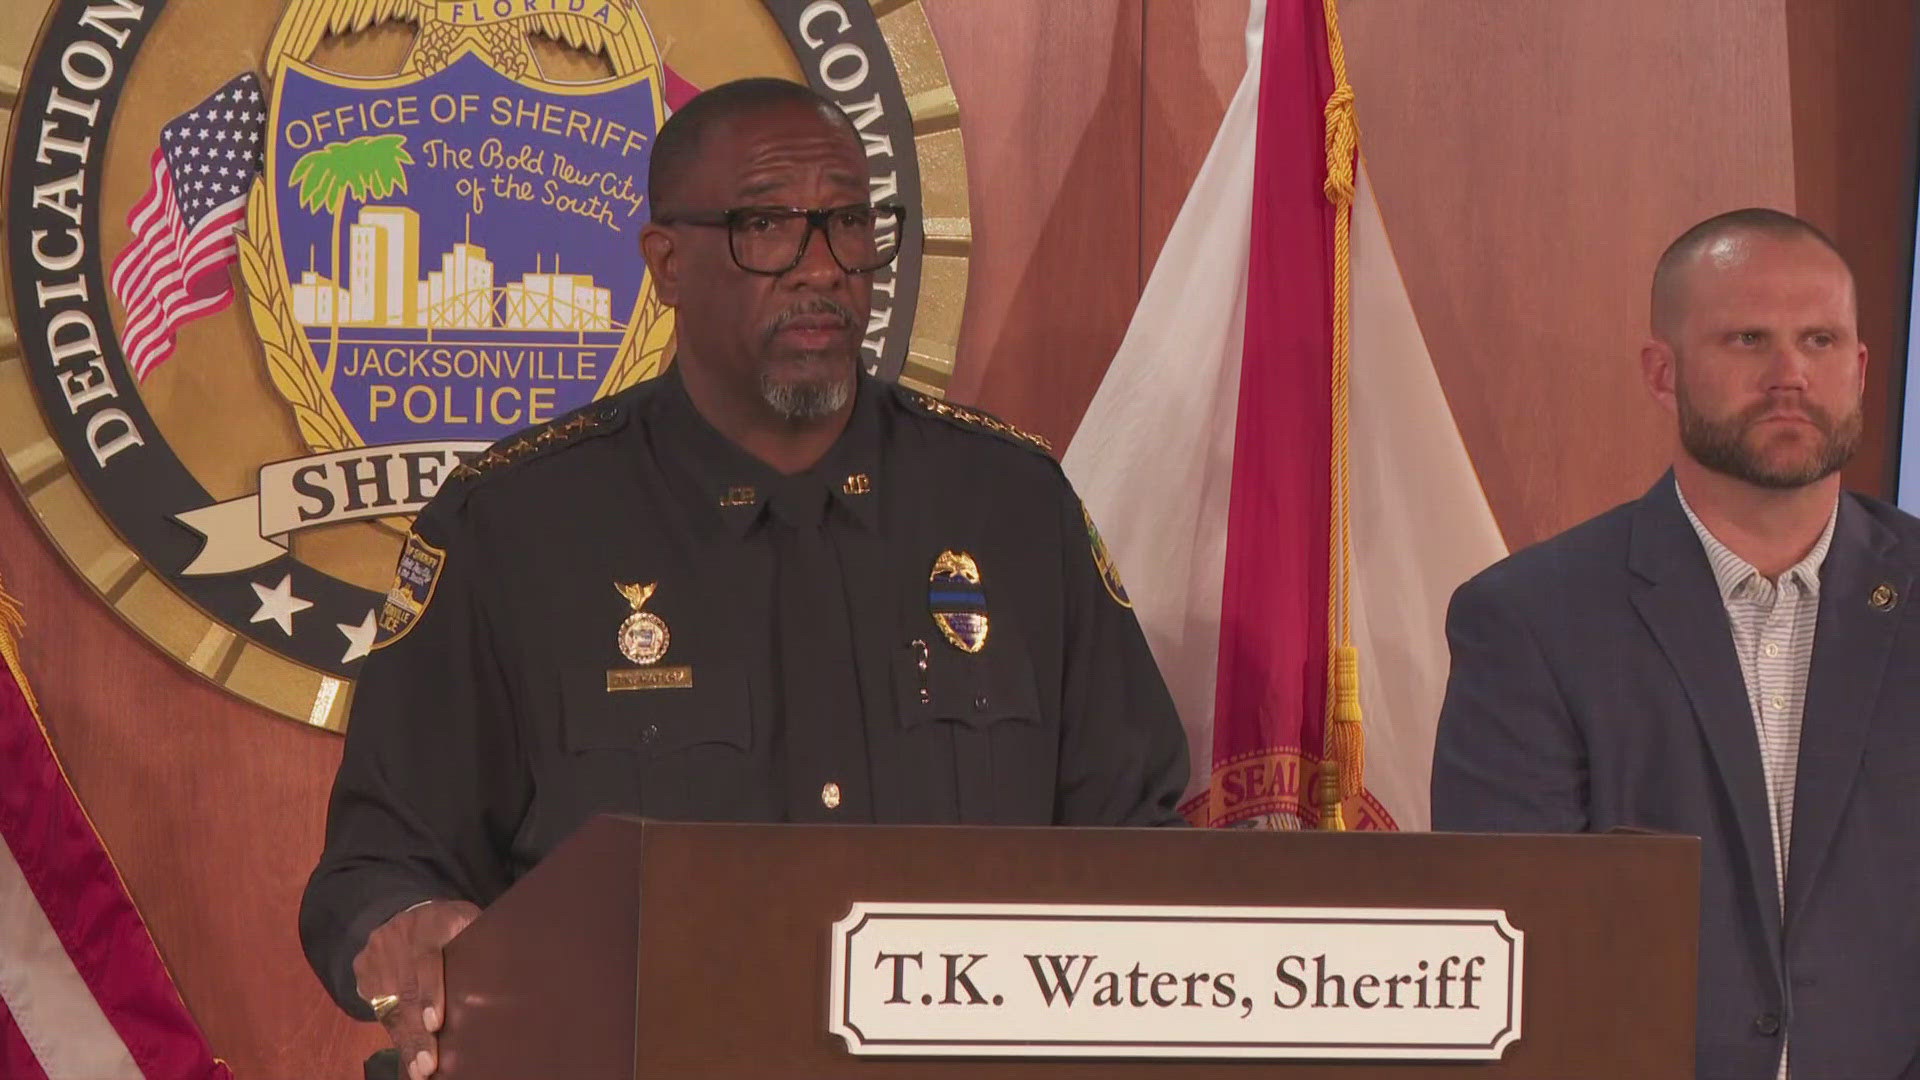 Sheriff T.K. Waters said the now-former officer's sister was arrested as well and that there are 7 arrest warrants out for other individuals "criminally involved."